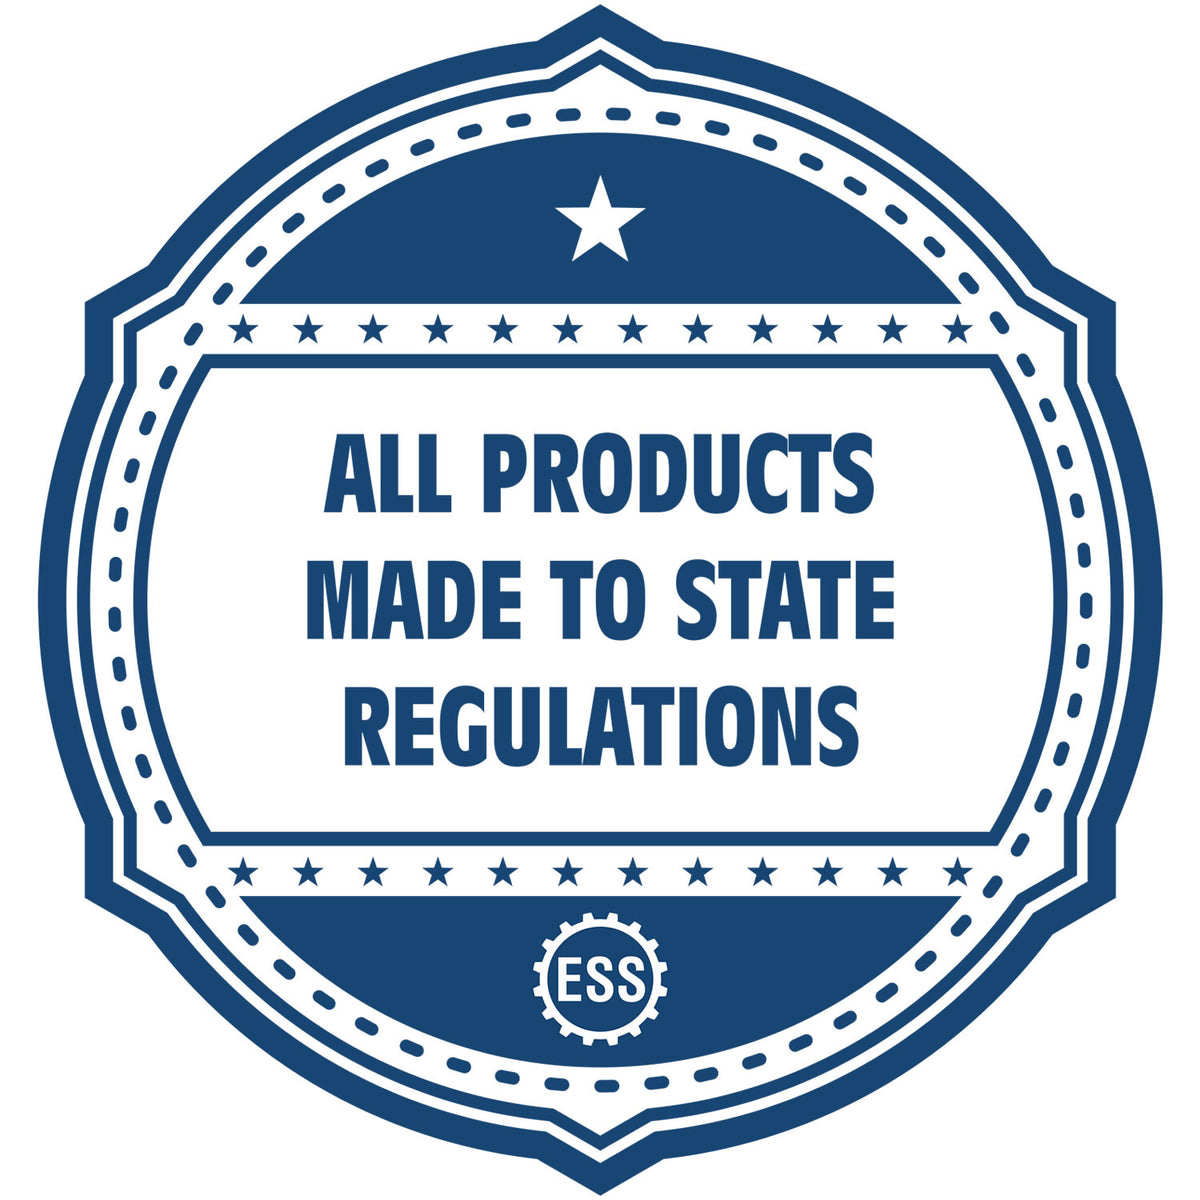 A blue icon or badge for the New Hampshire Geologist Desk Seal showing that this product is made in compliance with state regulations.